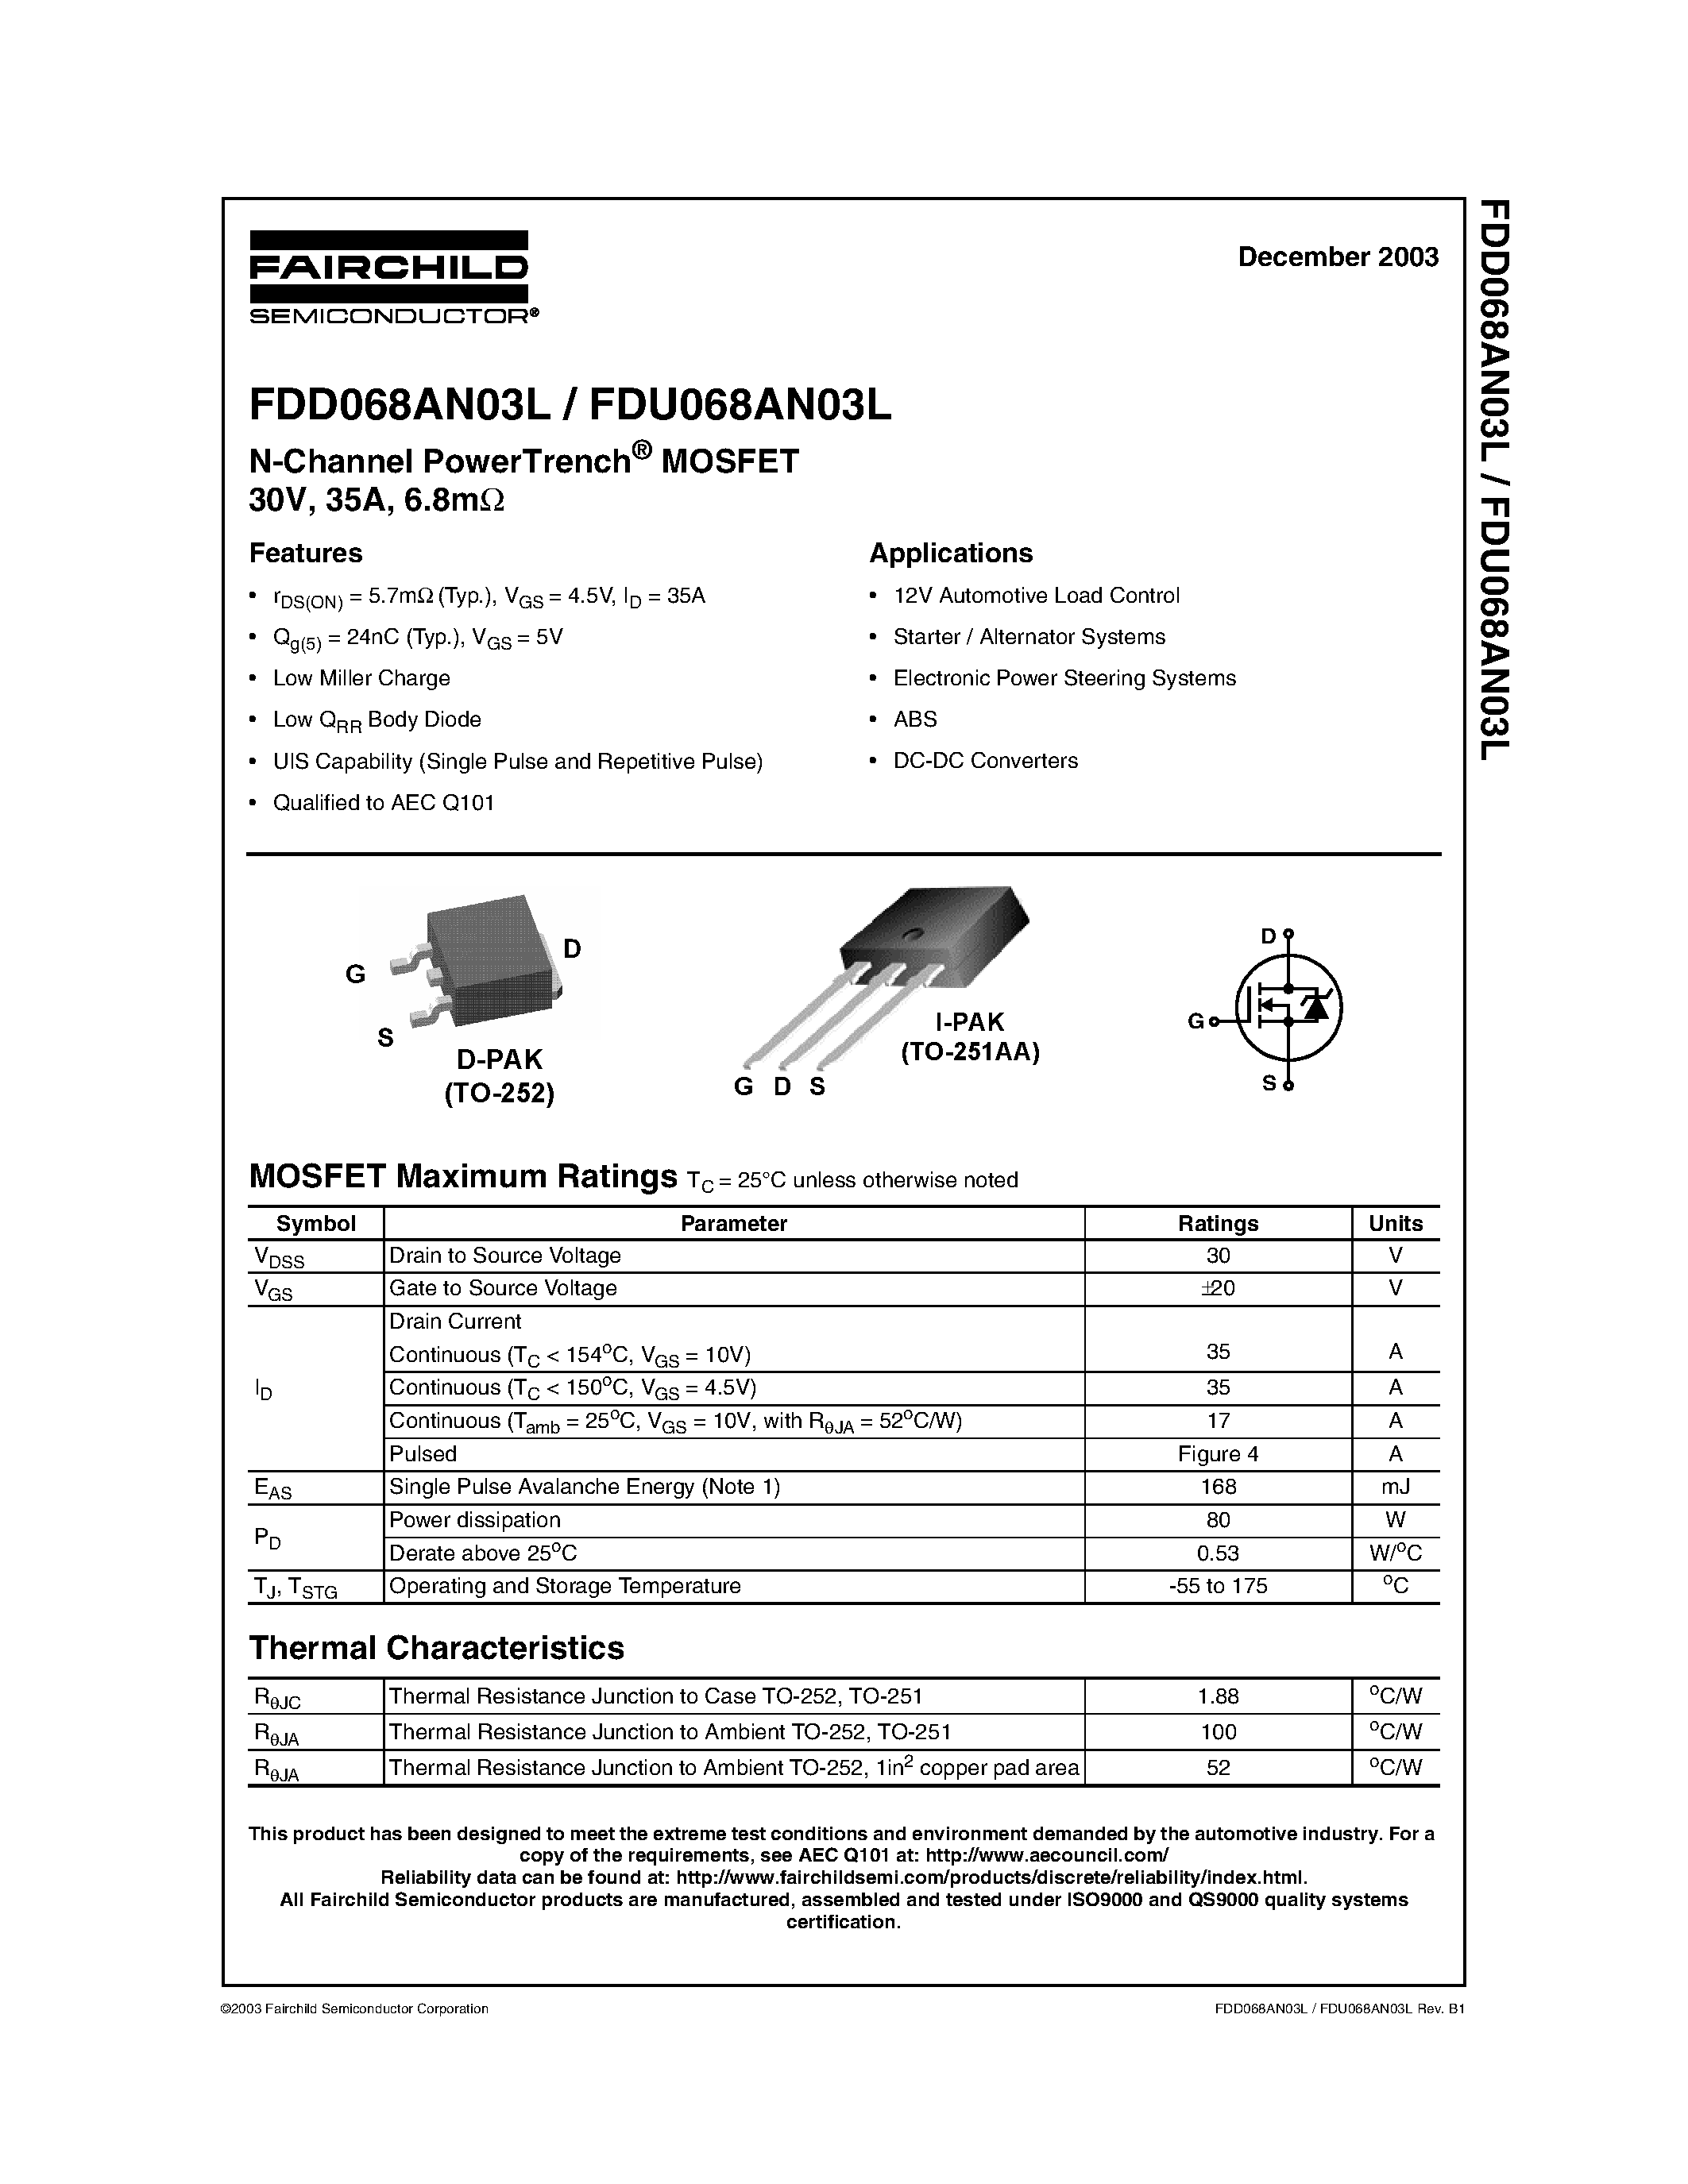 Datasheet FDD068AN03L - N-Channel PowerTrench MOSFET 30V/ 35A/ 6.8m page 1